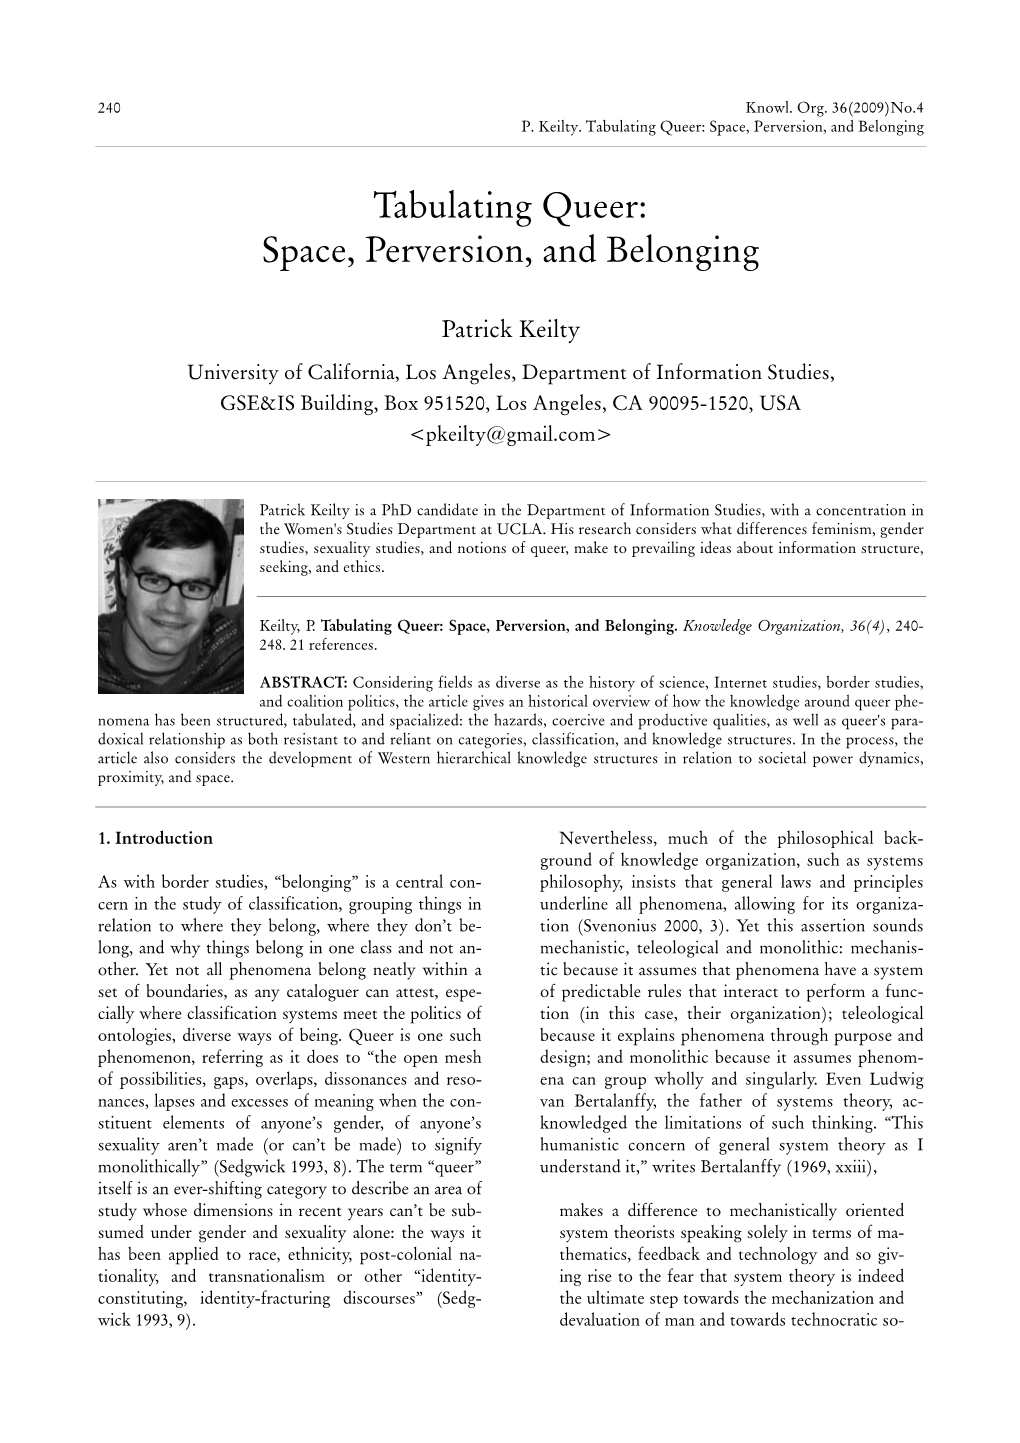 Tabulating Queer: Space, Perversion, and Belonging